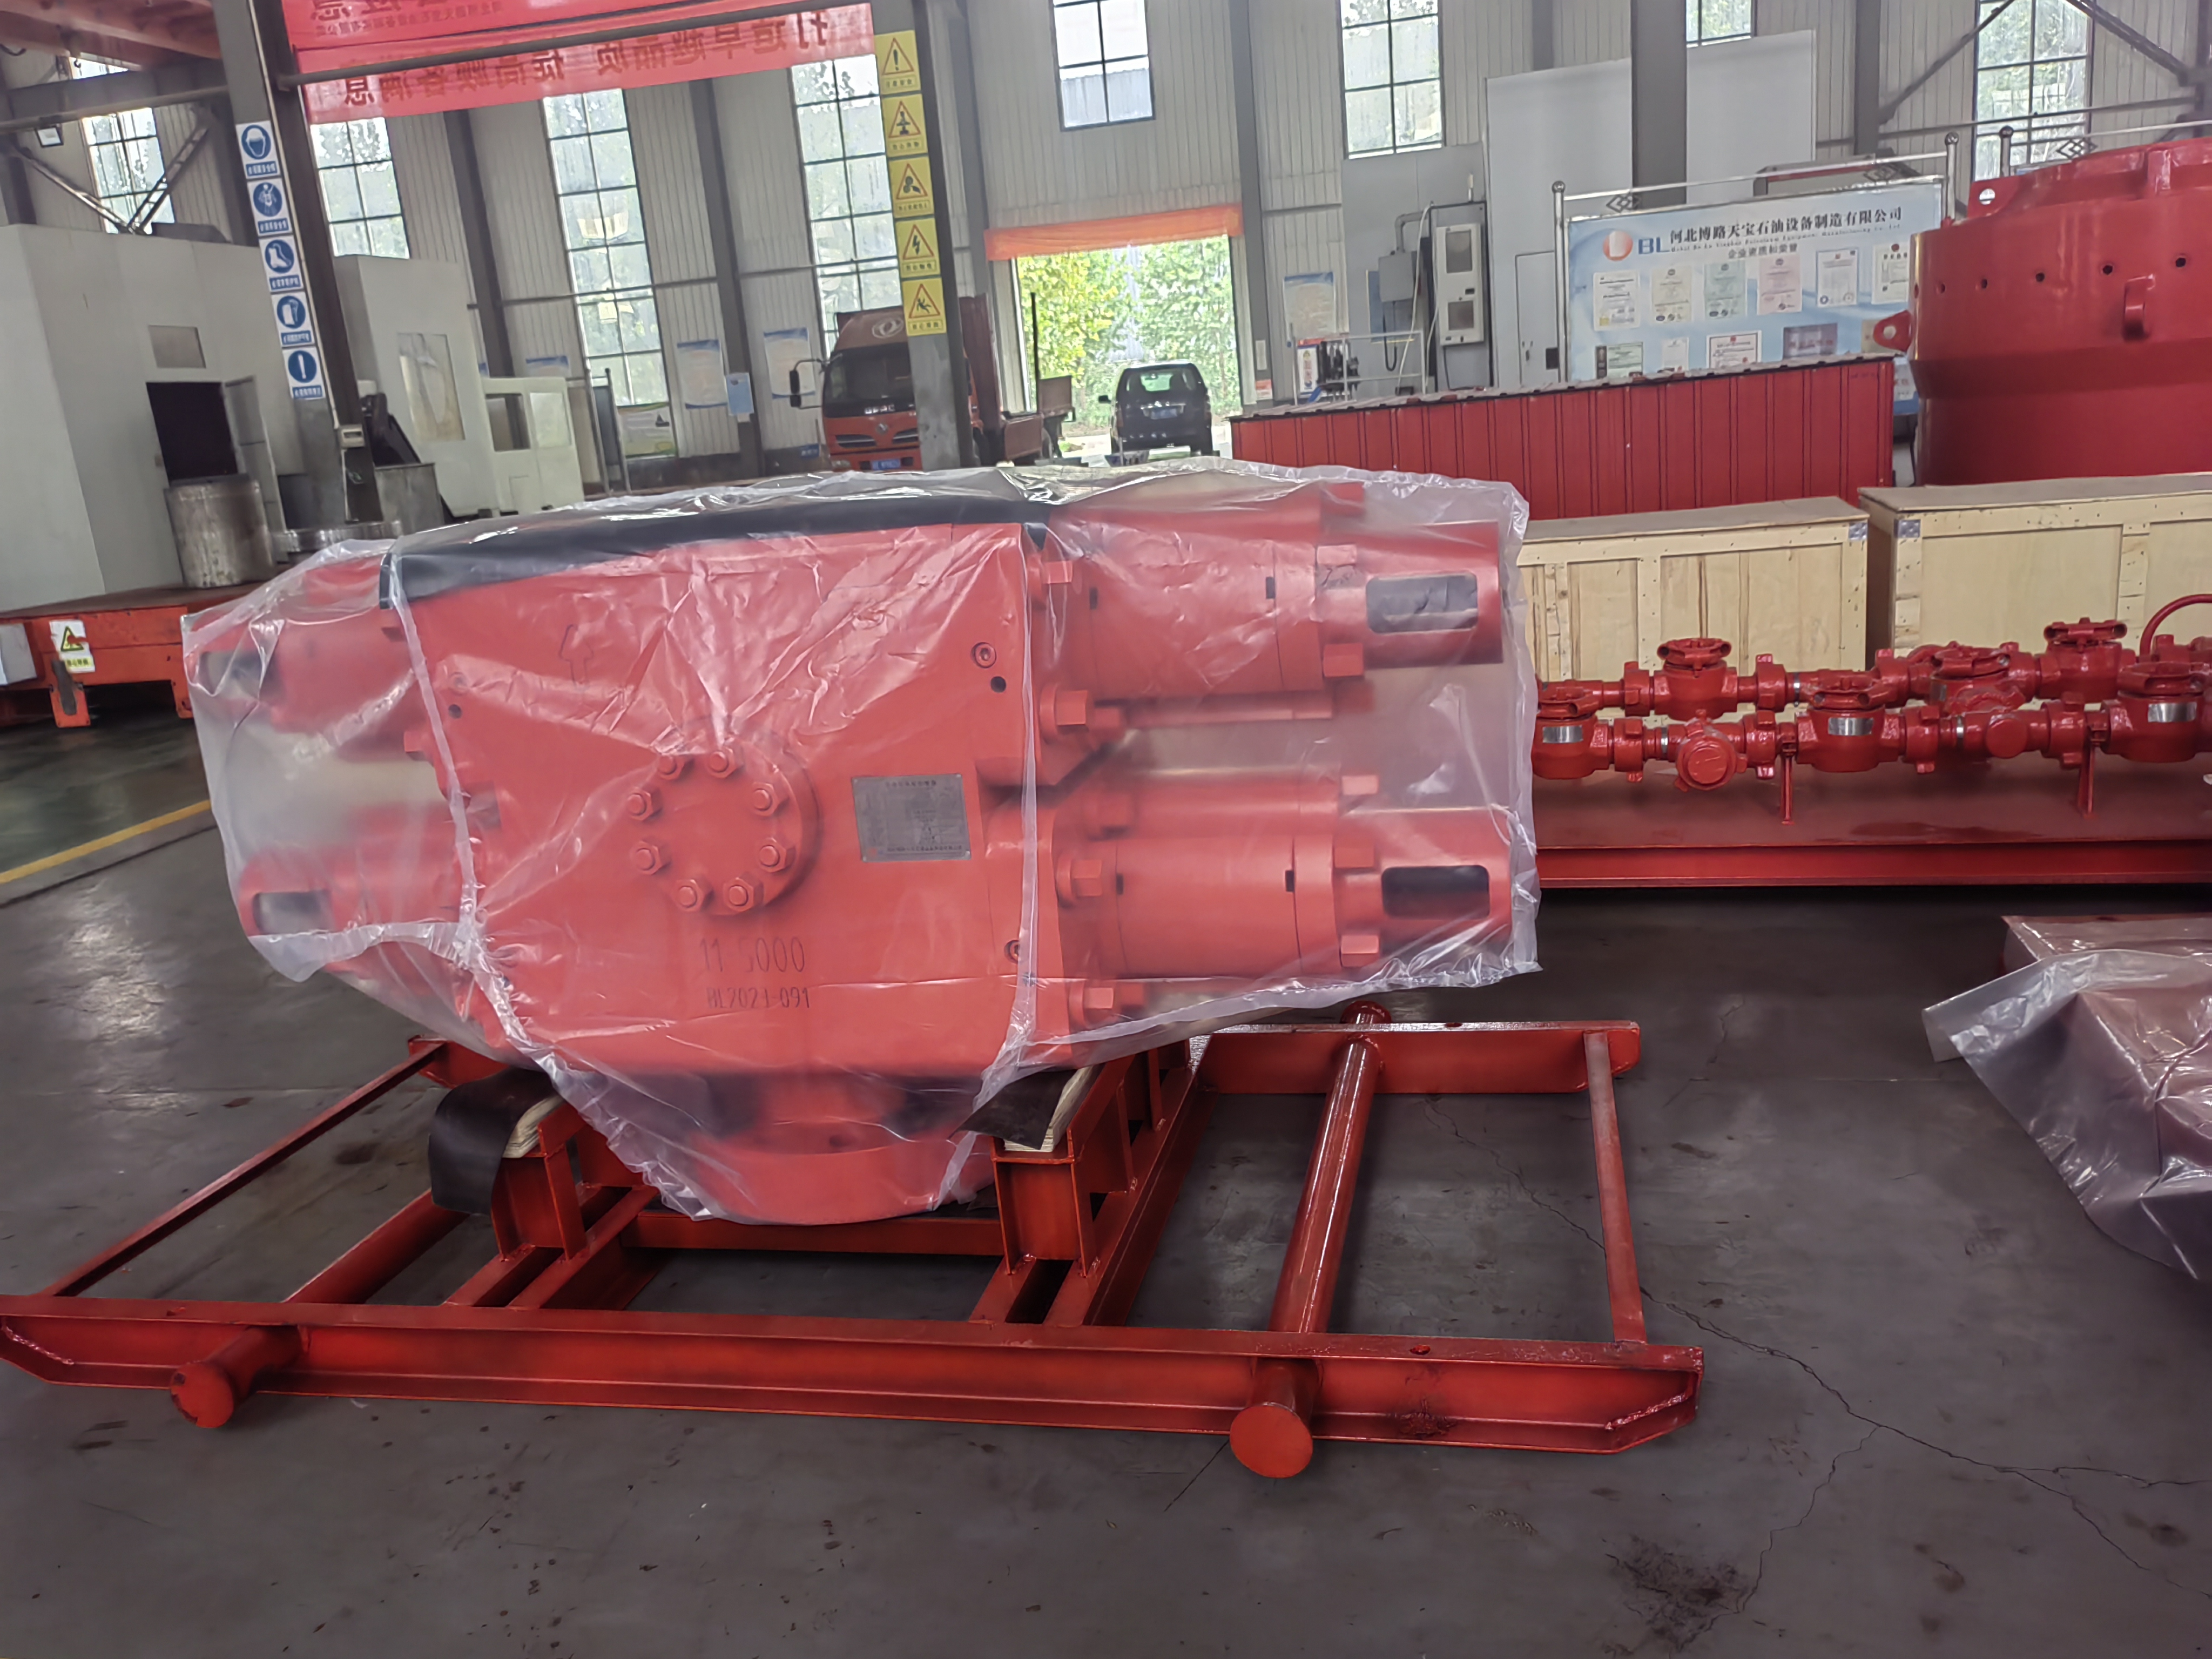 API 16A hydraulic Double ram Bop/blowout preventer For Oil Well Control